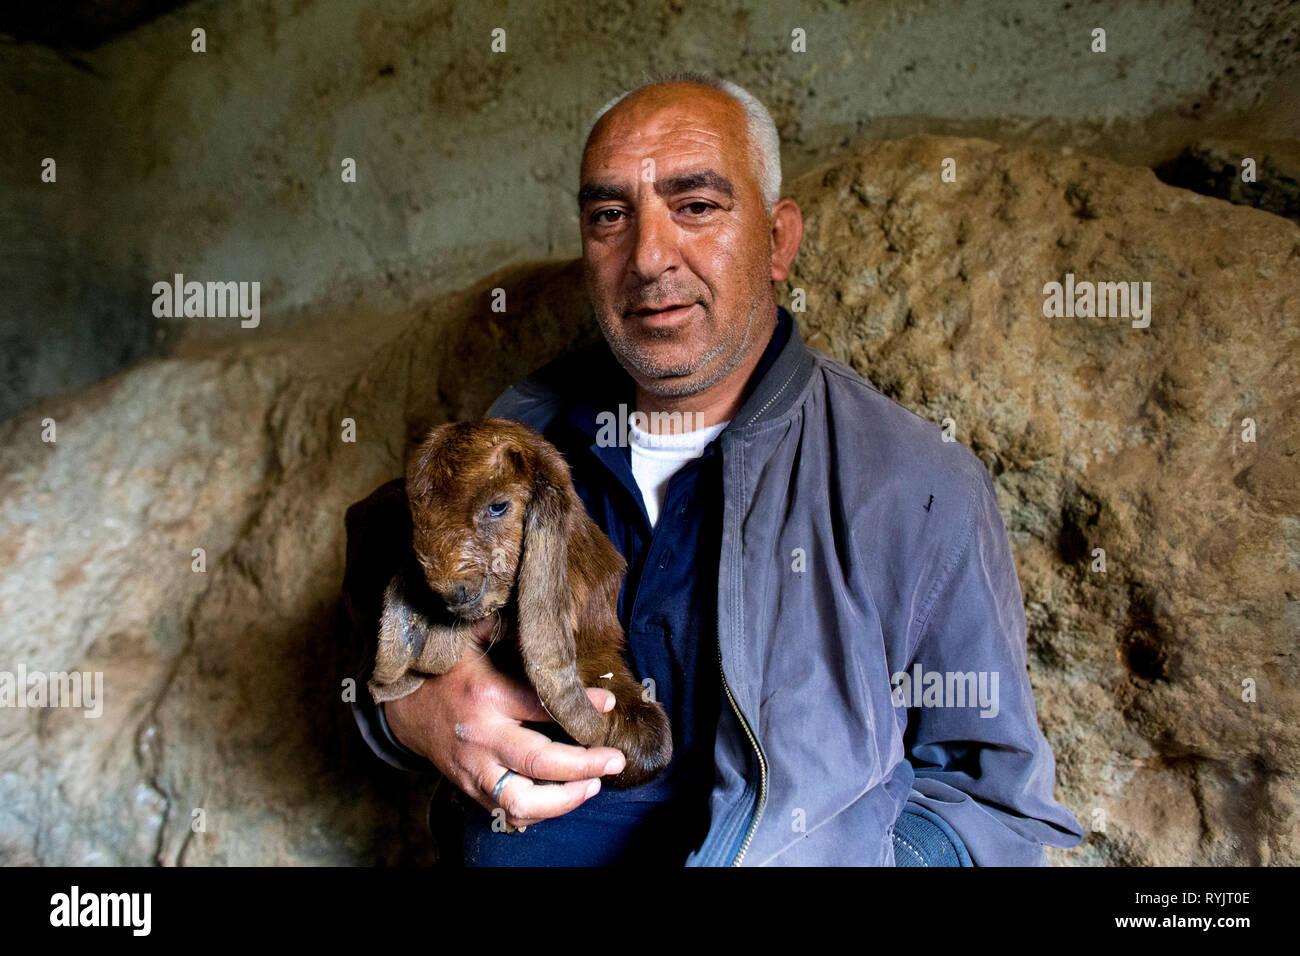 Disabled Abed Alsalahm Mohammed Abed Mahdi Khamaiseh received an interest-free U.S.$4000 loan from ACAD finance to raise cattle in Taffoh, West Bank, Stock Photo